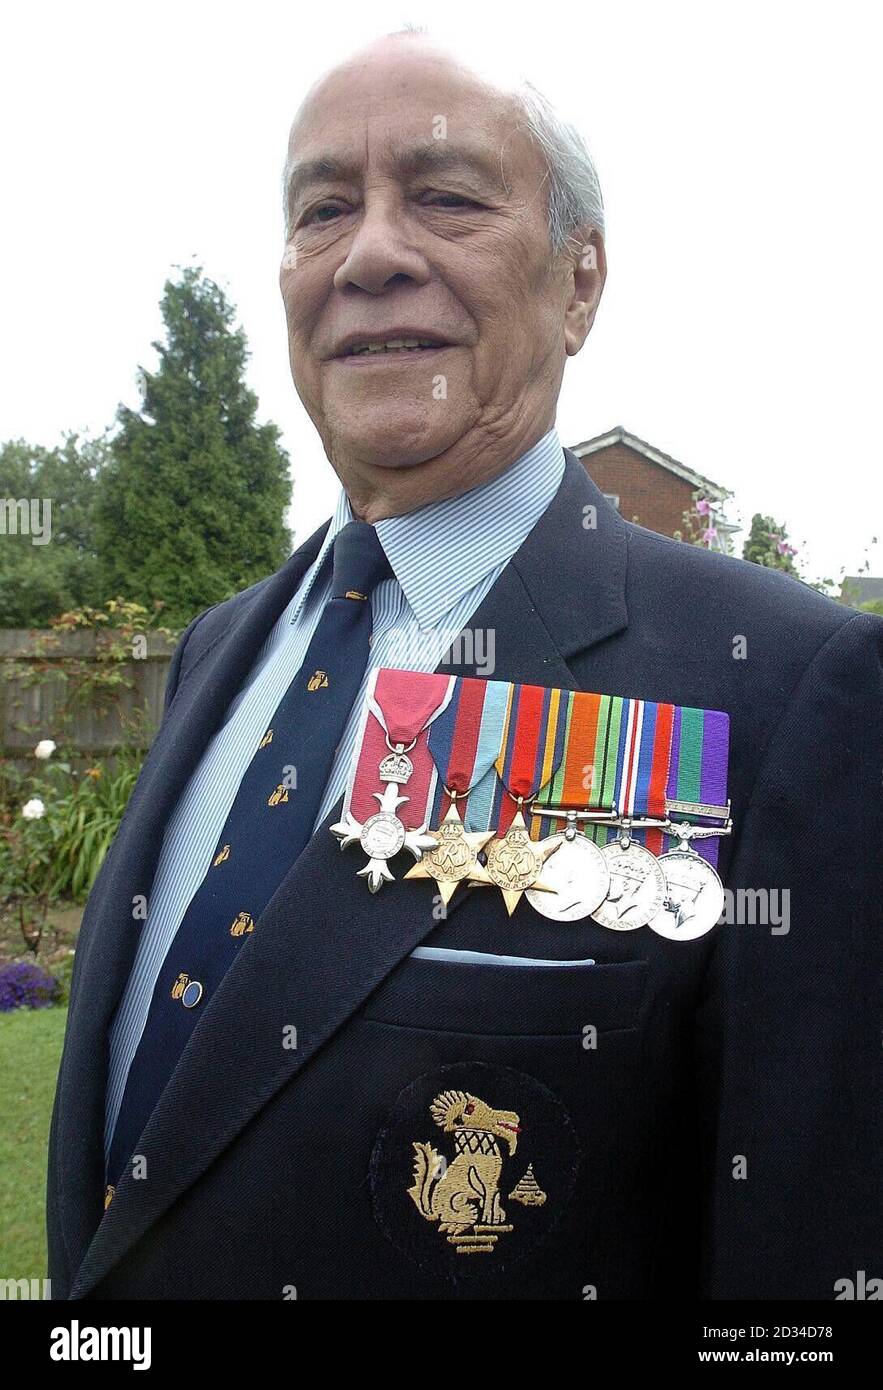 Major Neville Hogan, 84, a former Chindit soldier in Burma shows off his  medals at his home in Hemel Hempstead, Hertfordshire. Burmese-born Hogan  was just 16-years-old when he borrowed his brother's birth